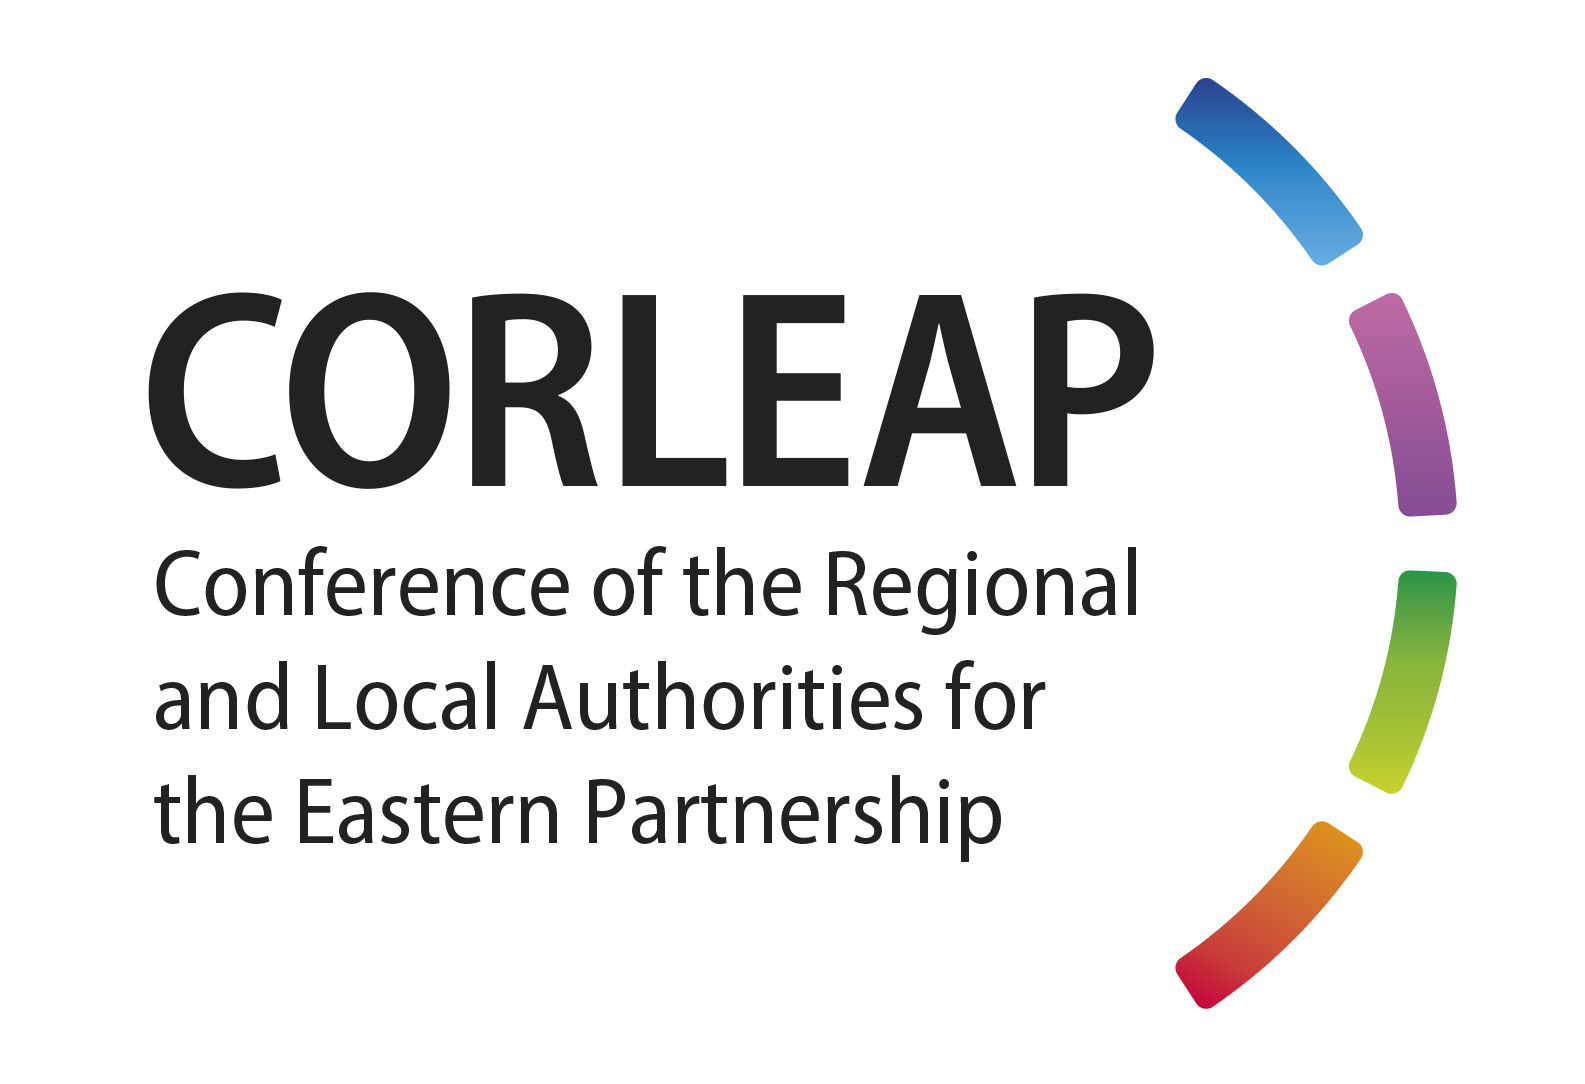 CORLEAP - Fostering participatory democracy at local and regional level